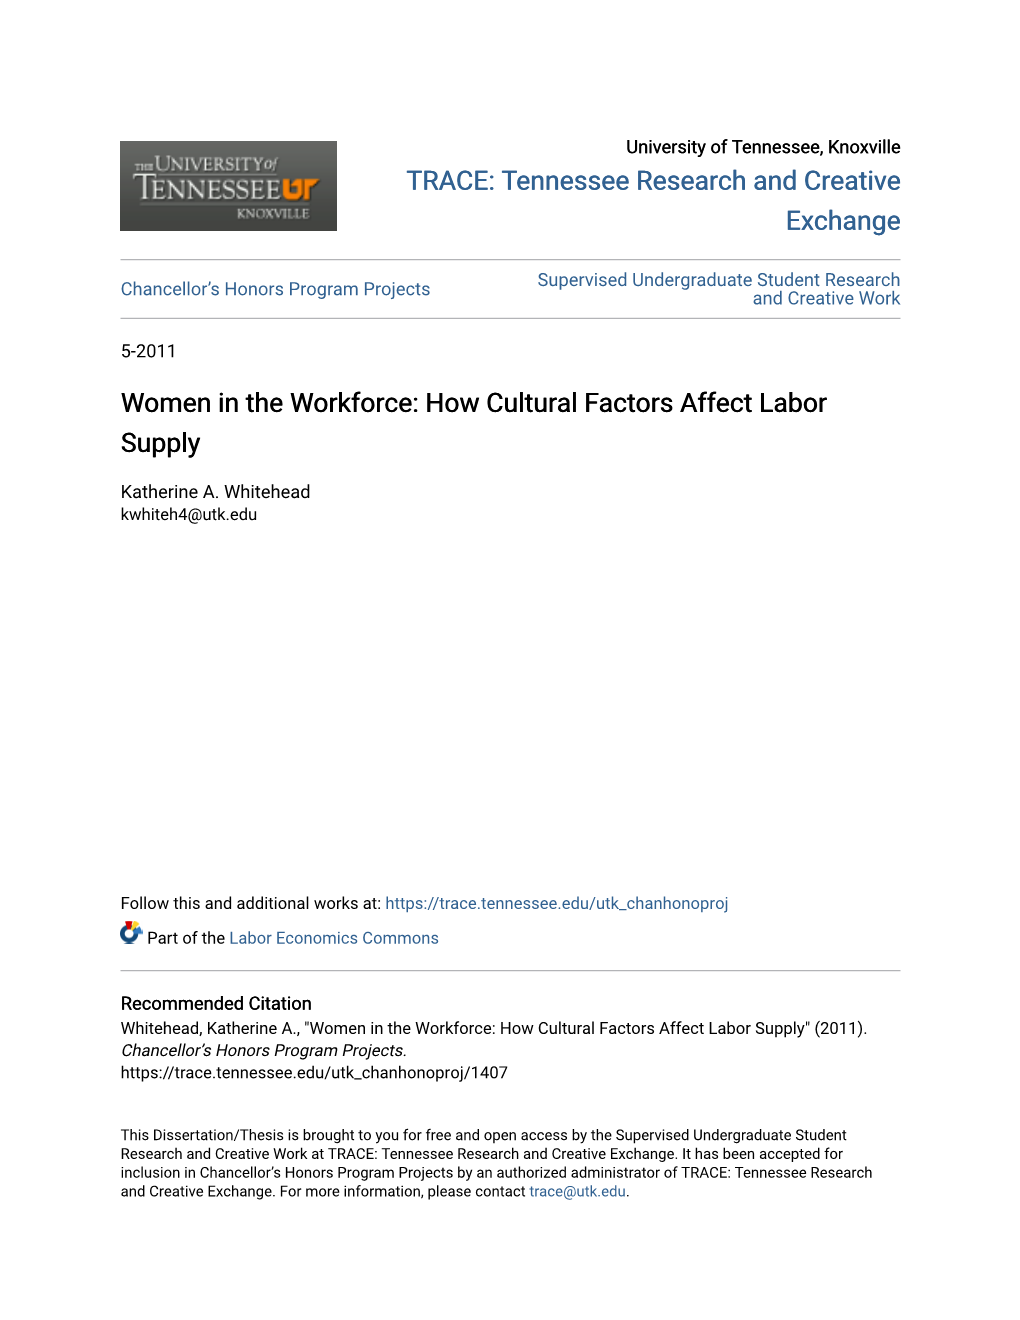 Women in the Workforce: How Cultural Factors Affect Labor Supply